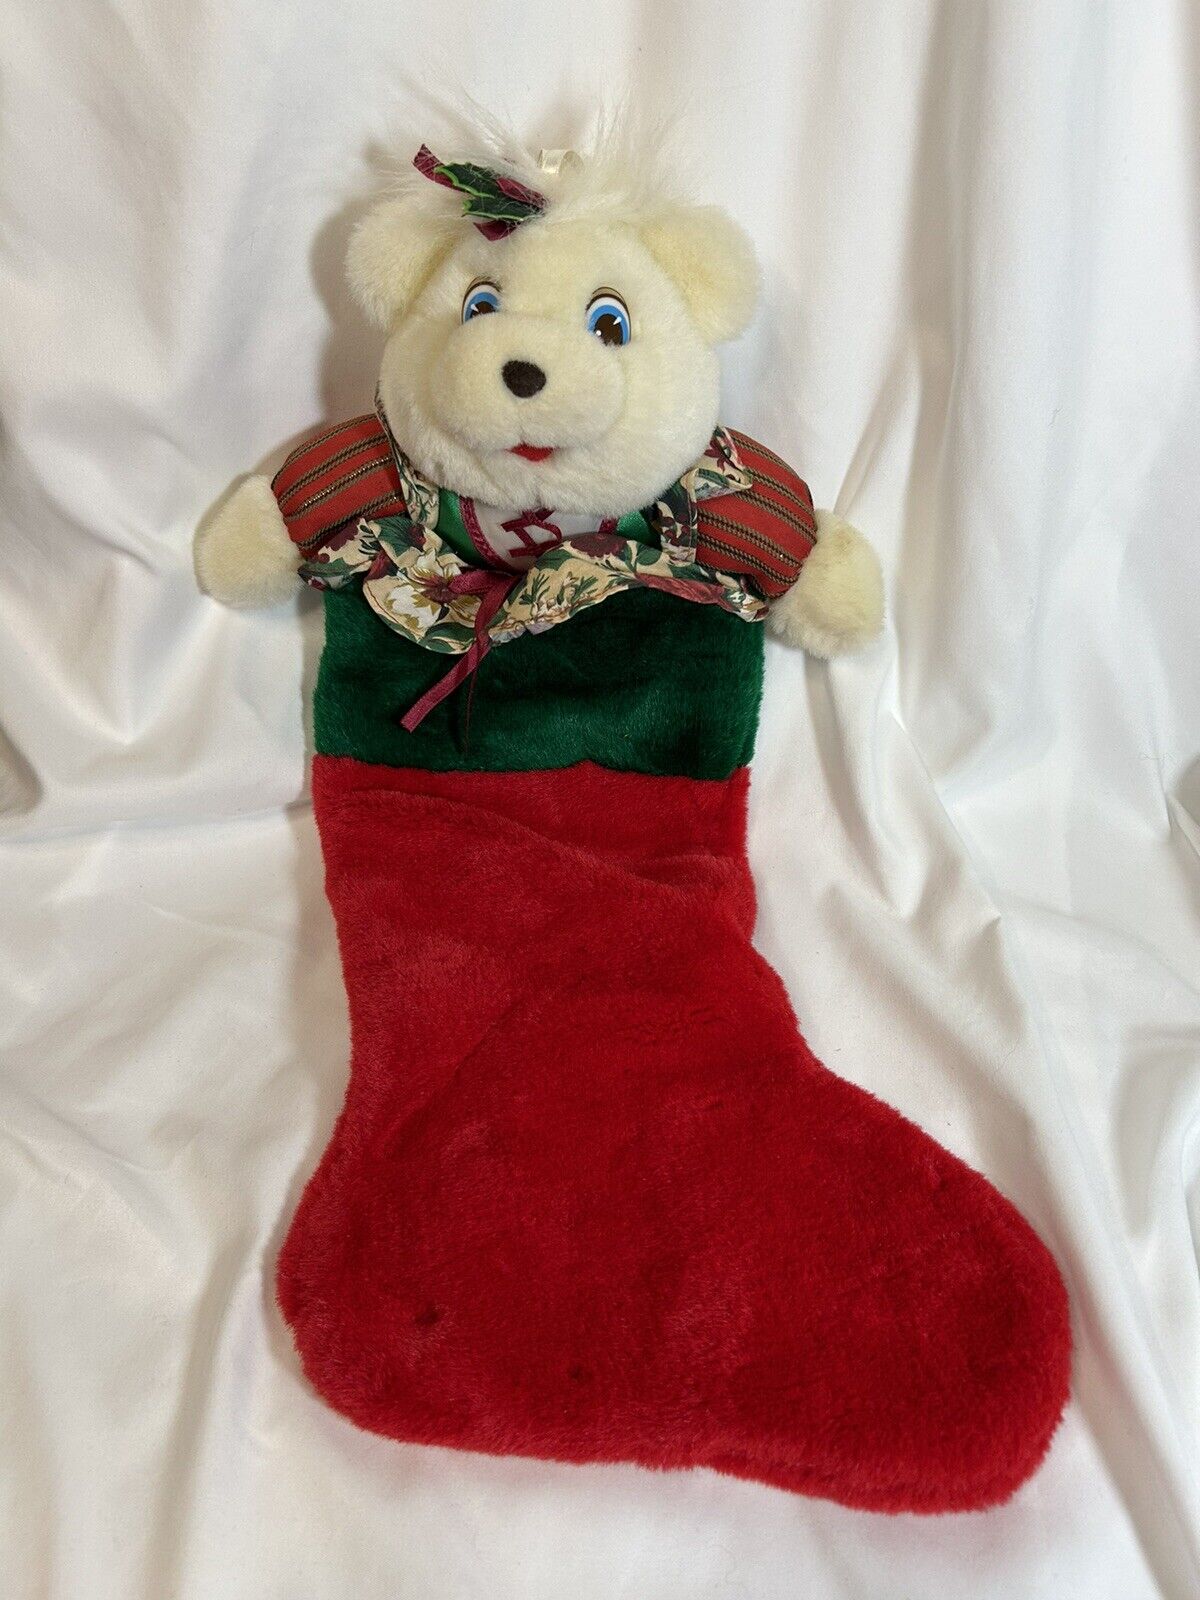 Kmart The Merry Gifts of Christmas Stocking Merry Teddy Bear Girl White 1993